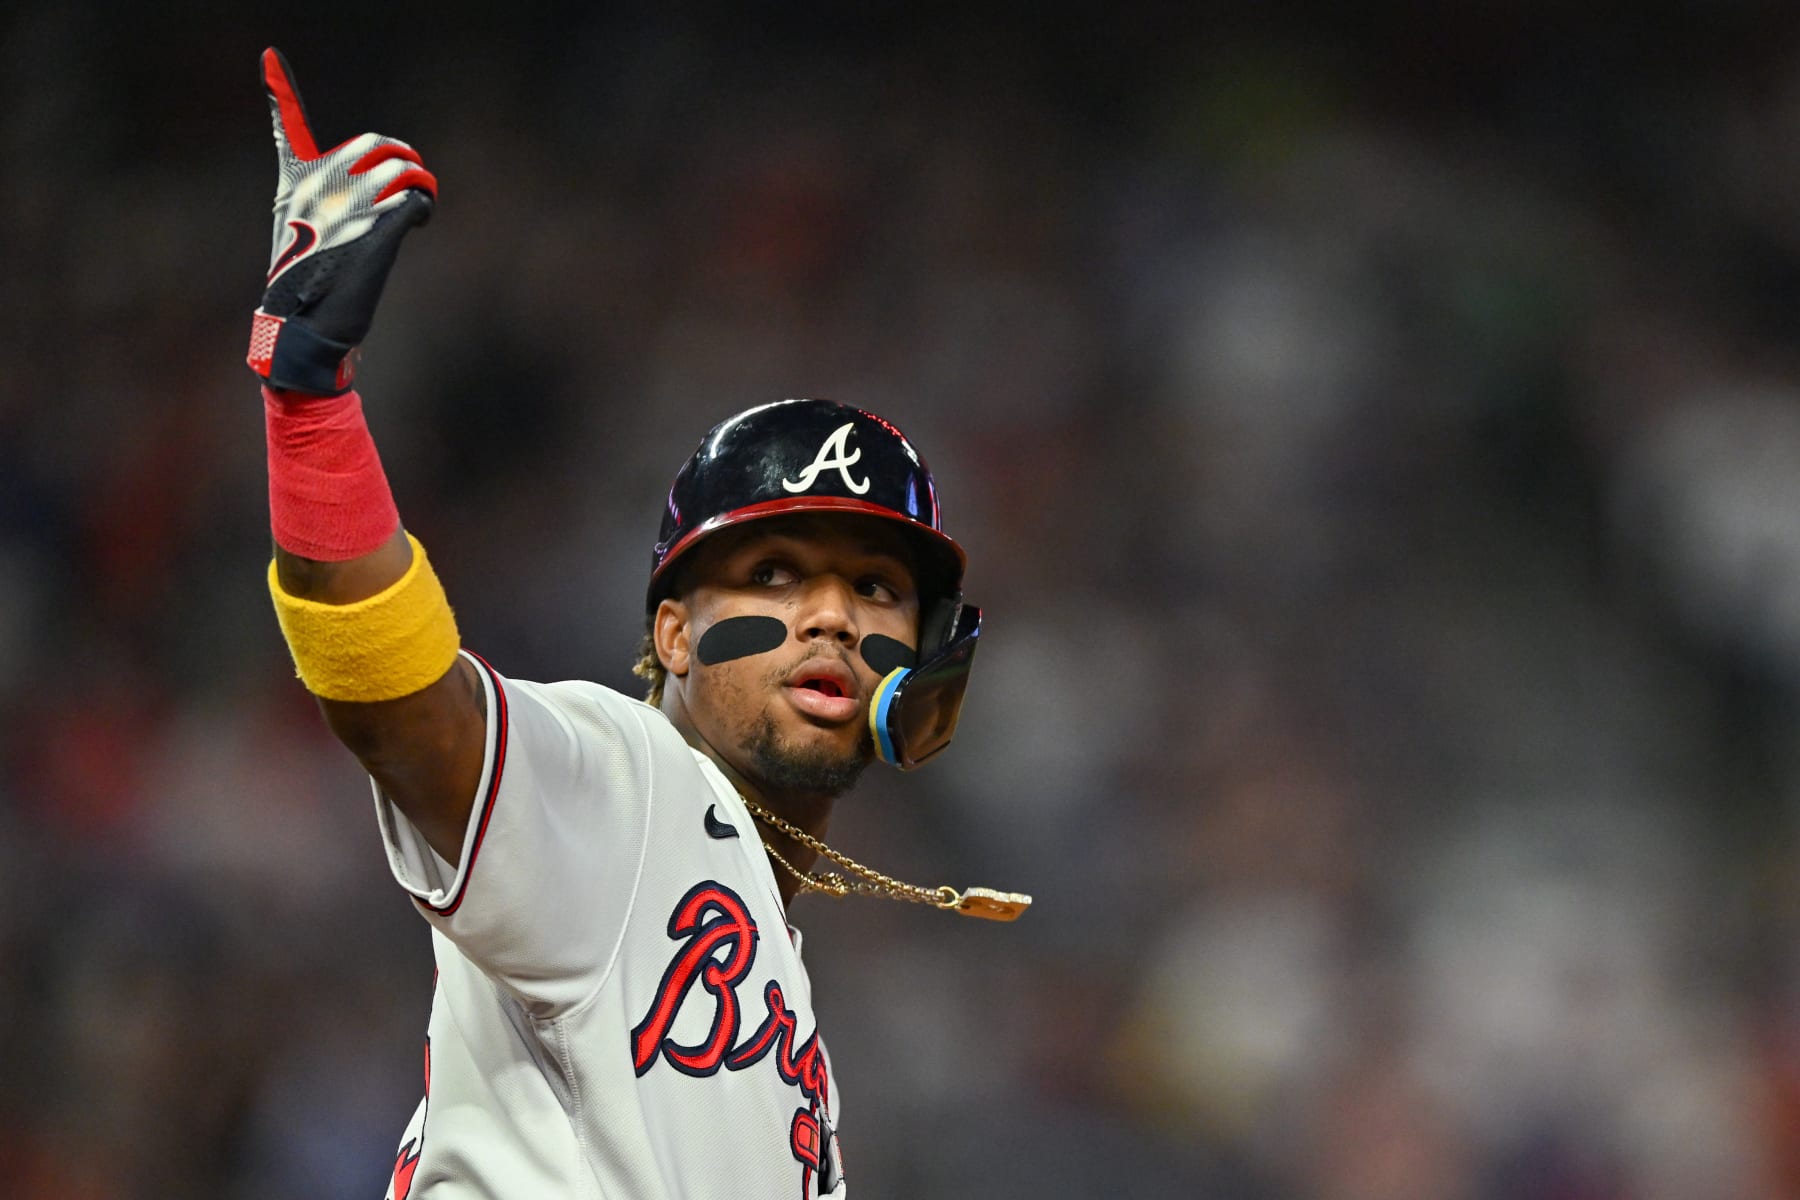 Dear MLB: Promote your best player, Ronald Acuña Jr. - Battery Power